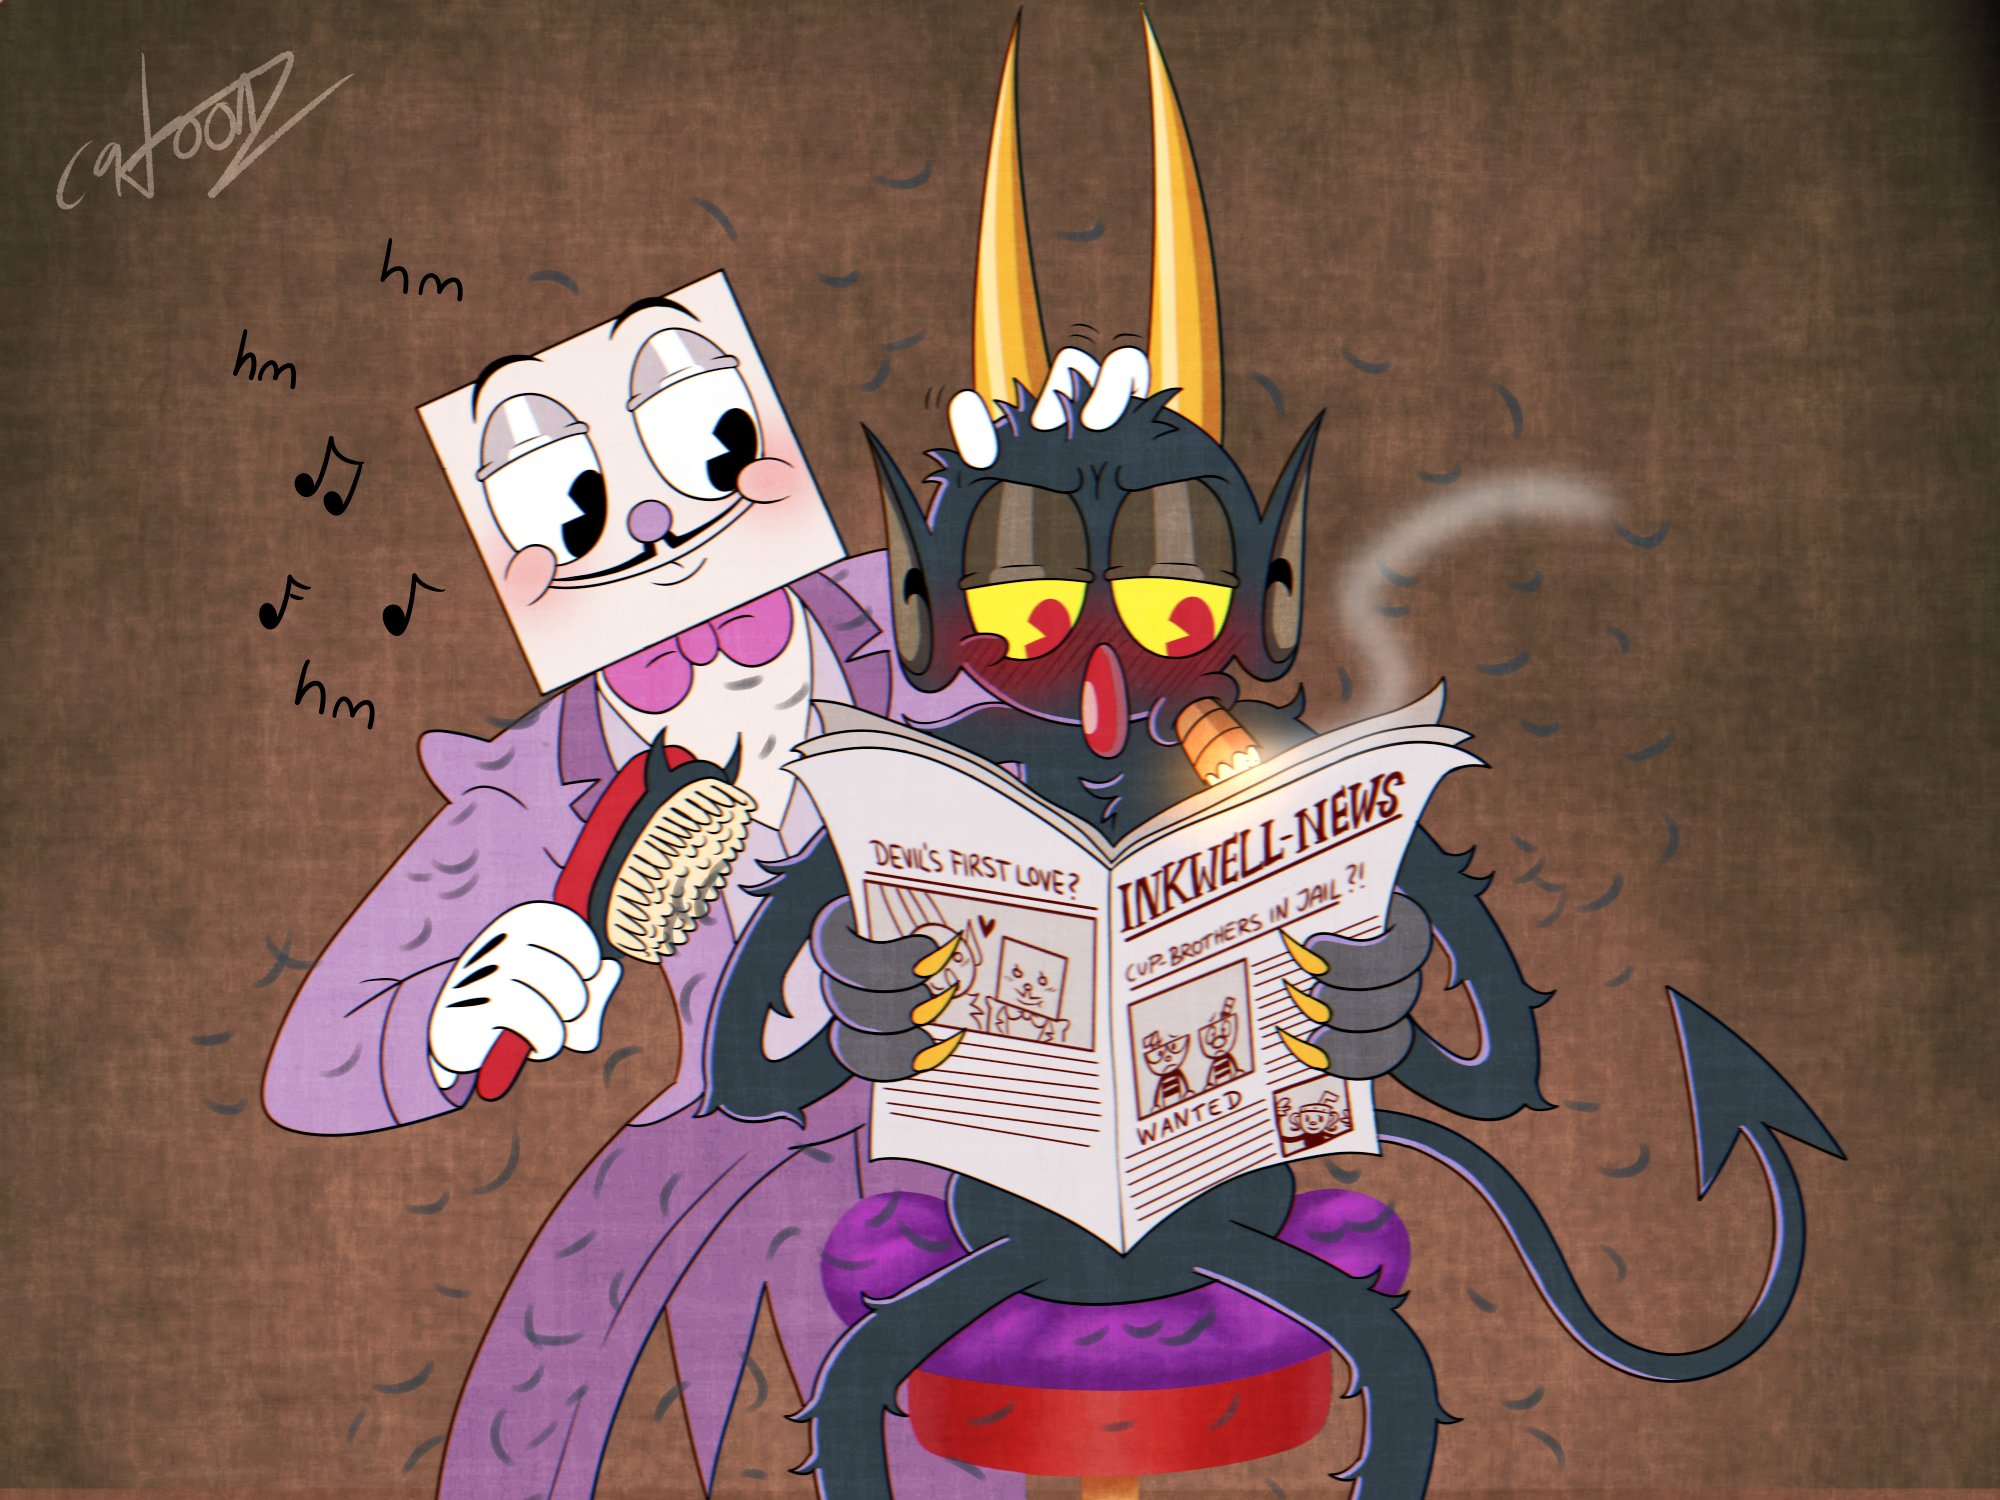 KING DICE X DEV  Cuphead Official™ Amino